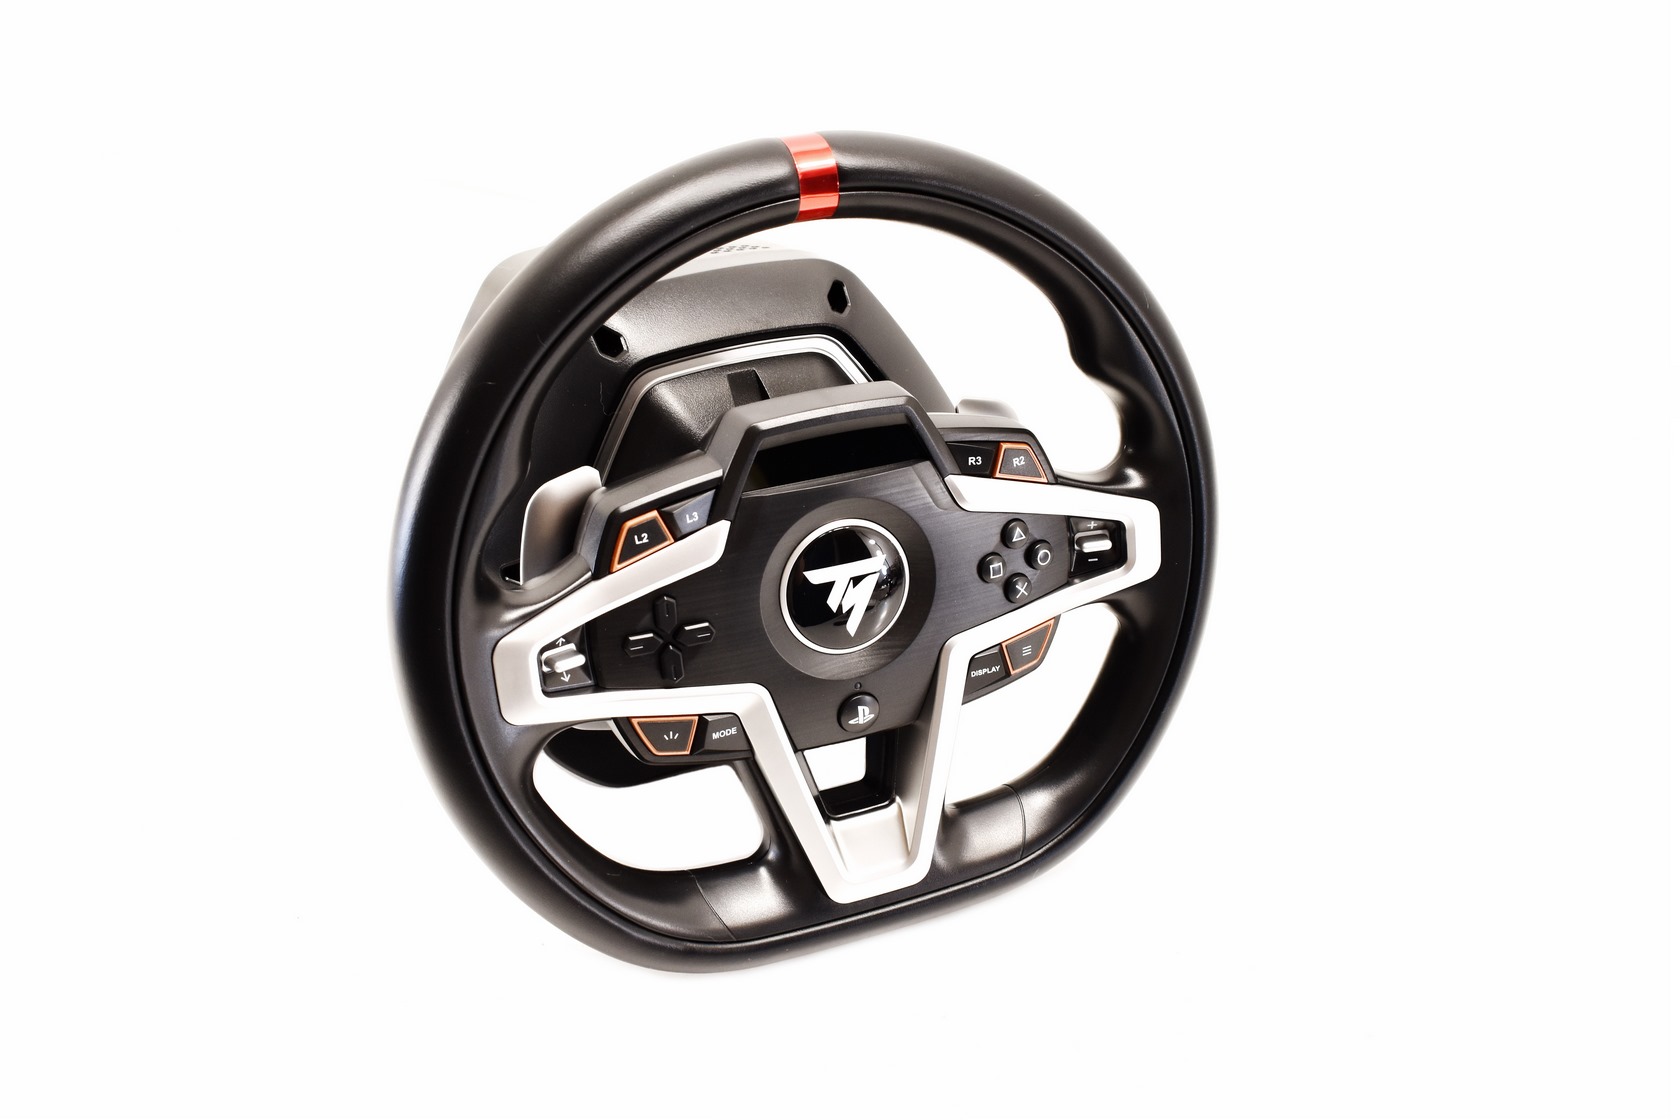 Thrustmaster T248 racing wheel review